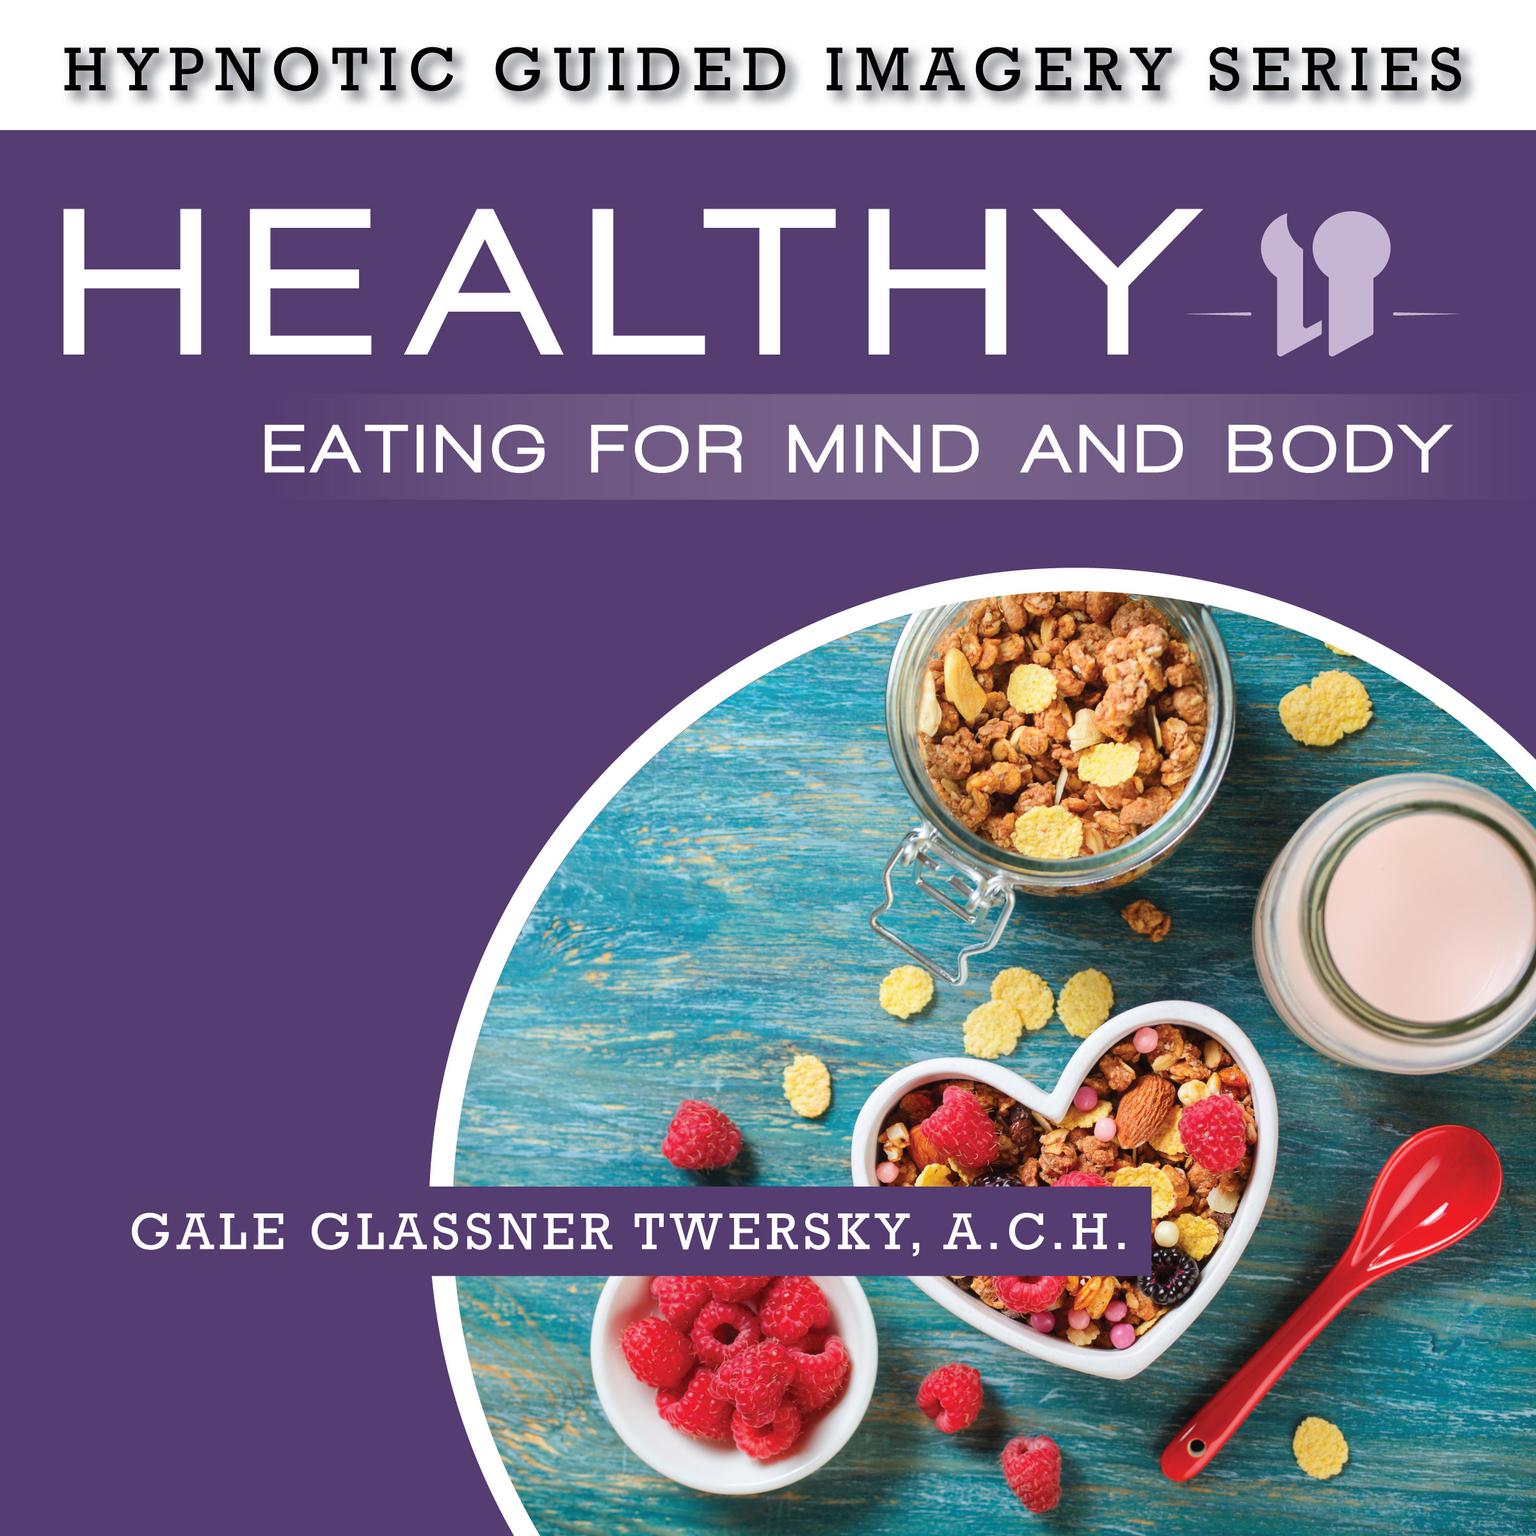 Healthy Eating for Mind and Body: The Hypnotic Guided Imagery Series Audiobook, by Gale Glassner Twersky 